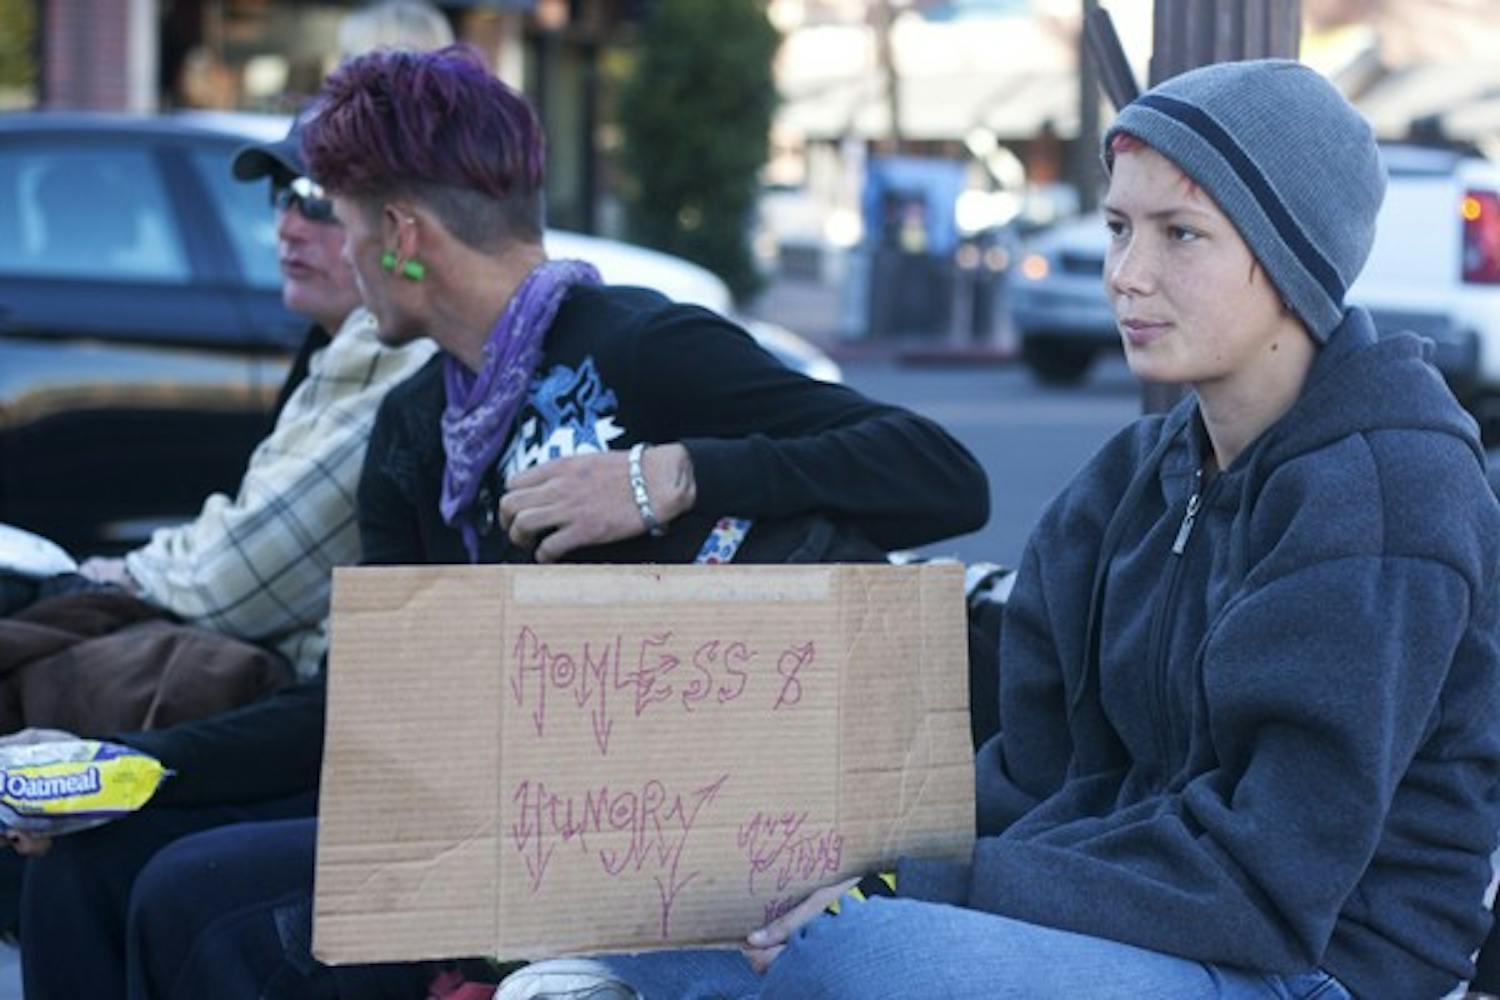 Sugar Girl sits with Eric Super Man and Pony Boy, holding up a sign that says "Homeless & Hungry" on Mill Avenue Monday afternoon. (Photo by Perla Farias)